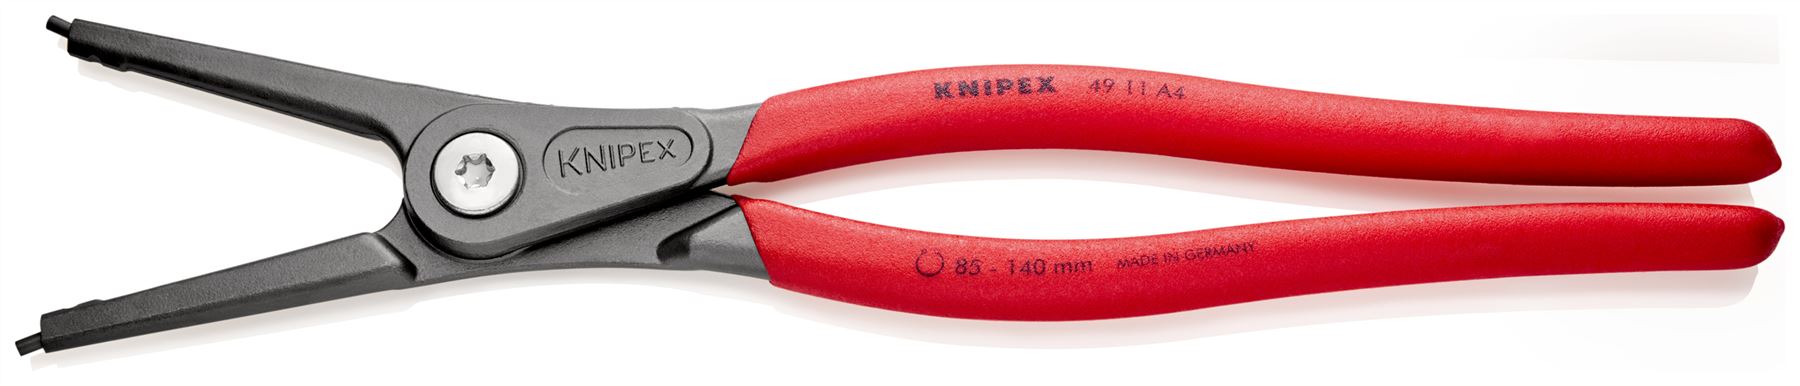 KNIPEX Precision Circlip Pliers for External Circlips on Shafts 320mm 3.2mm Diameter Tips 49 11 A4